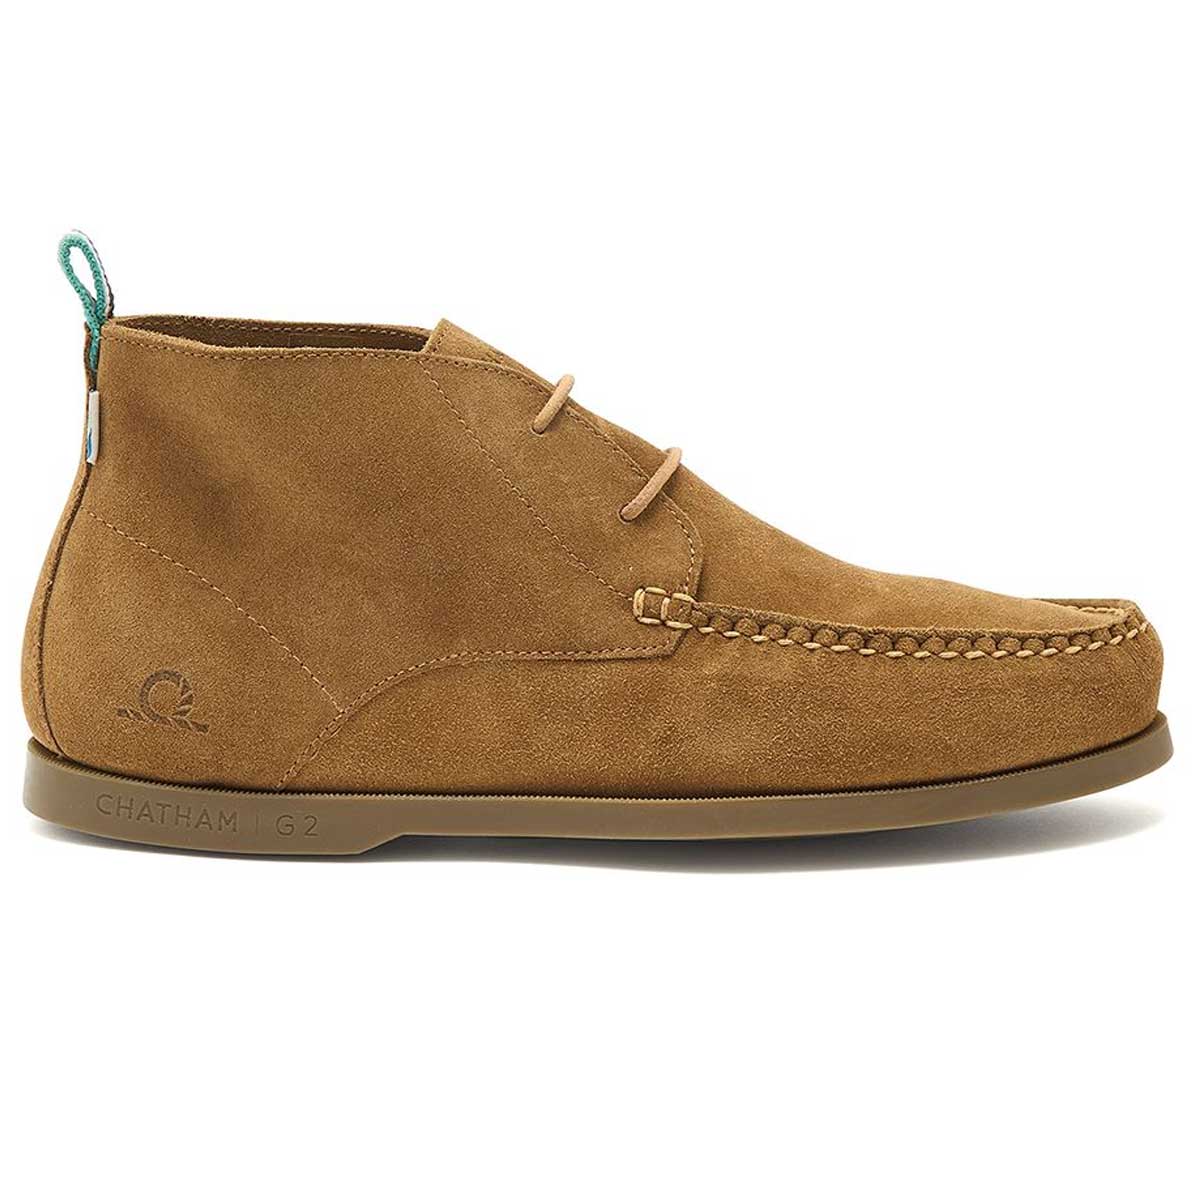 CHATHAM Ives Repello Suede G2 Boat Chukka Boots - Men's - Tan